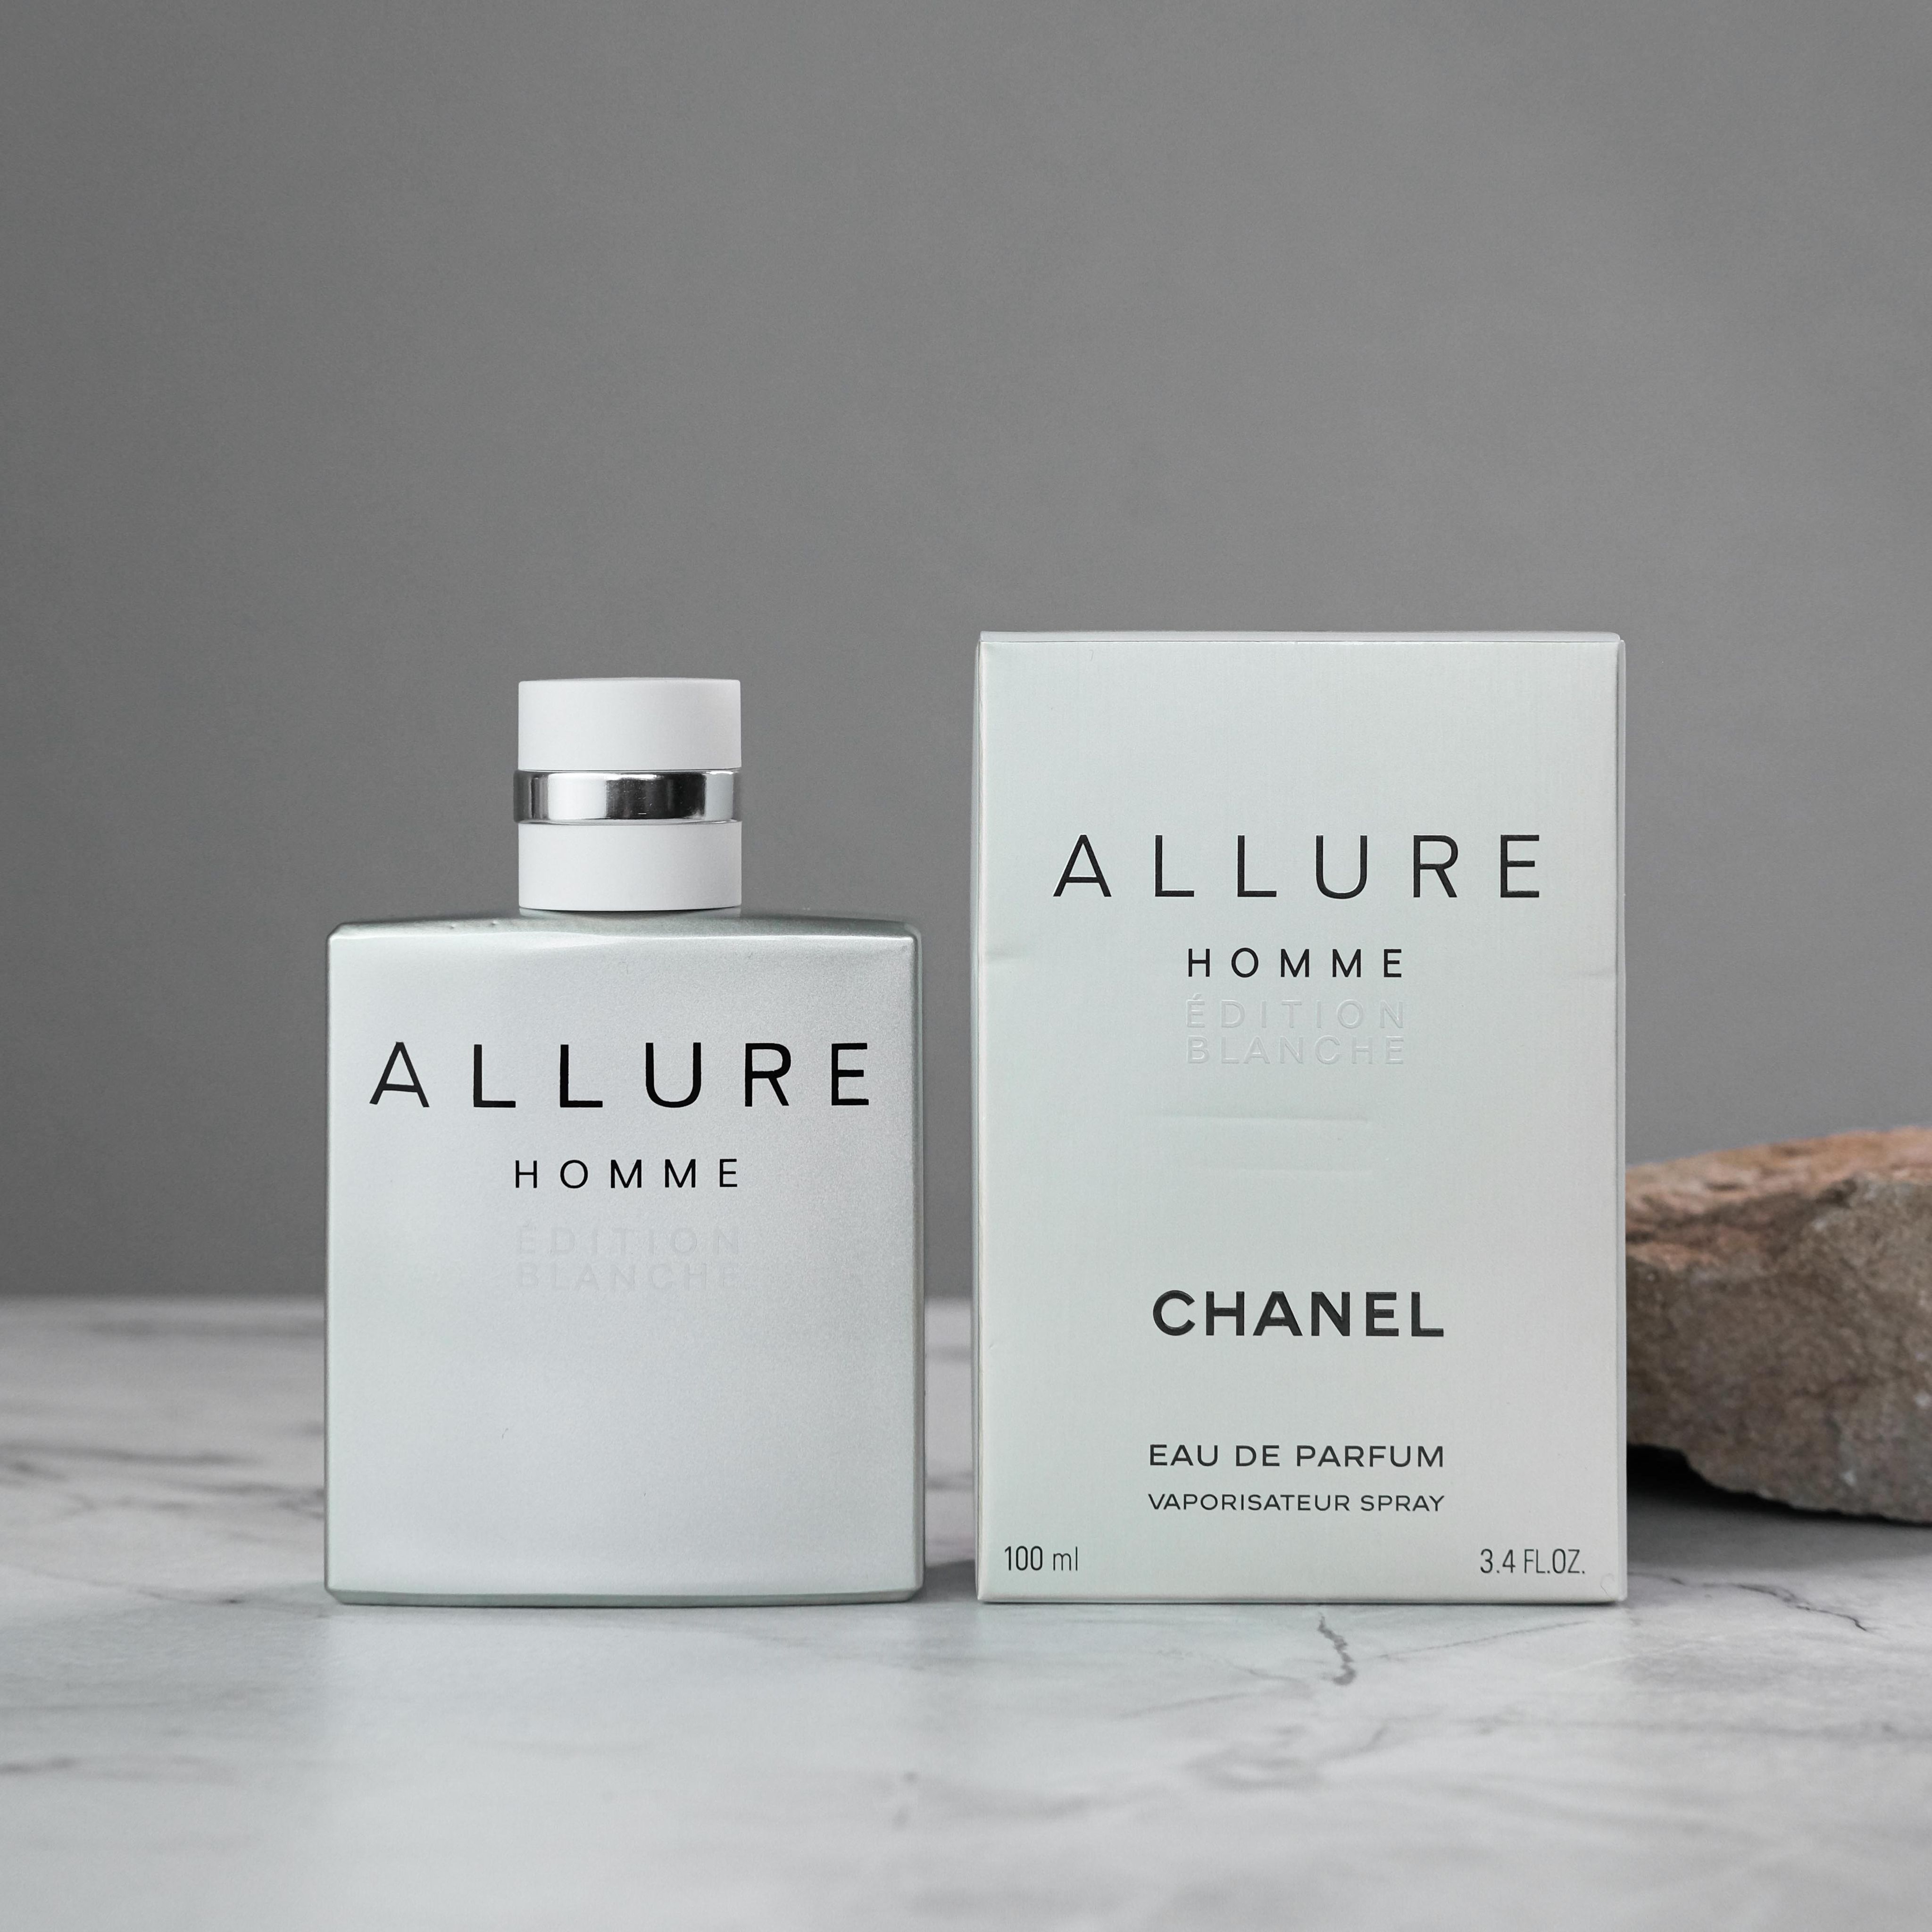 Chanel homme edition blanche. Chanel Allure homme Edition Blanche. Chanel Allure Edition Blanche. Allure homme Edition Blanche. Chanel Allure homme Edition Blanche EDP, 100 ml (Luxe евро).